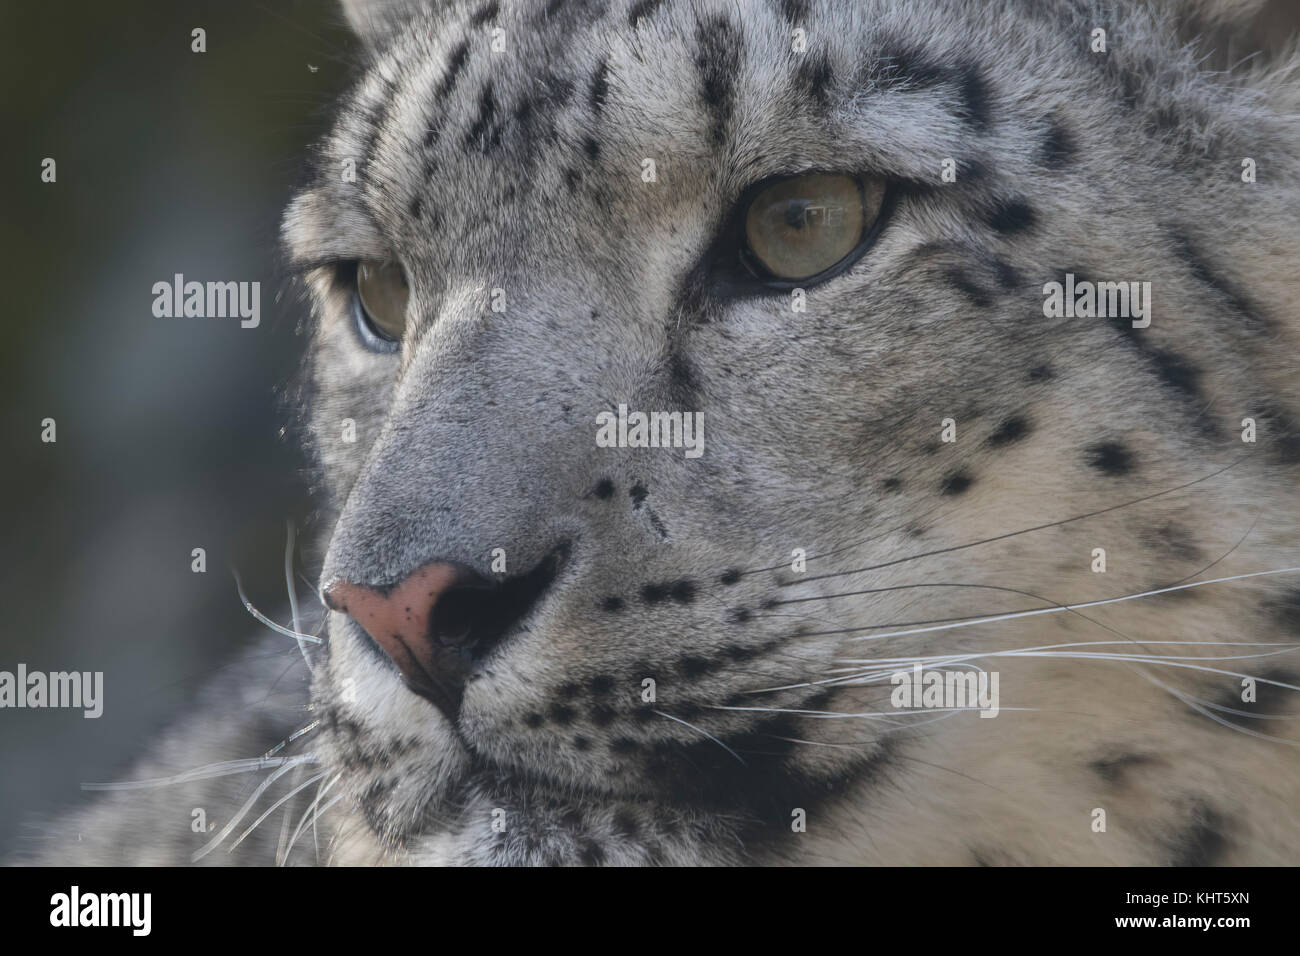 snow leopard, Panthera uncia, captive, close up portraits with facial expressions sitting on a rock and amongst foilage. Stock Photo